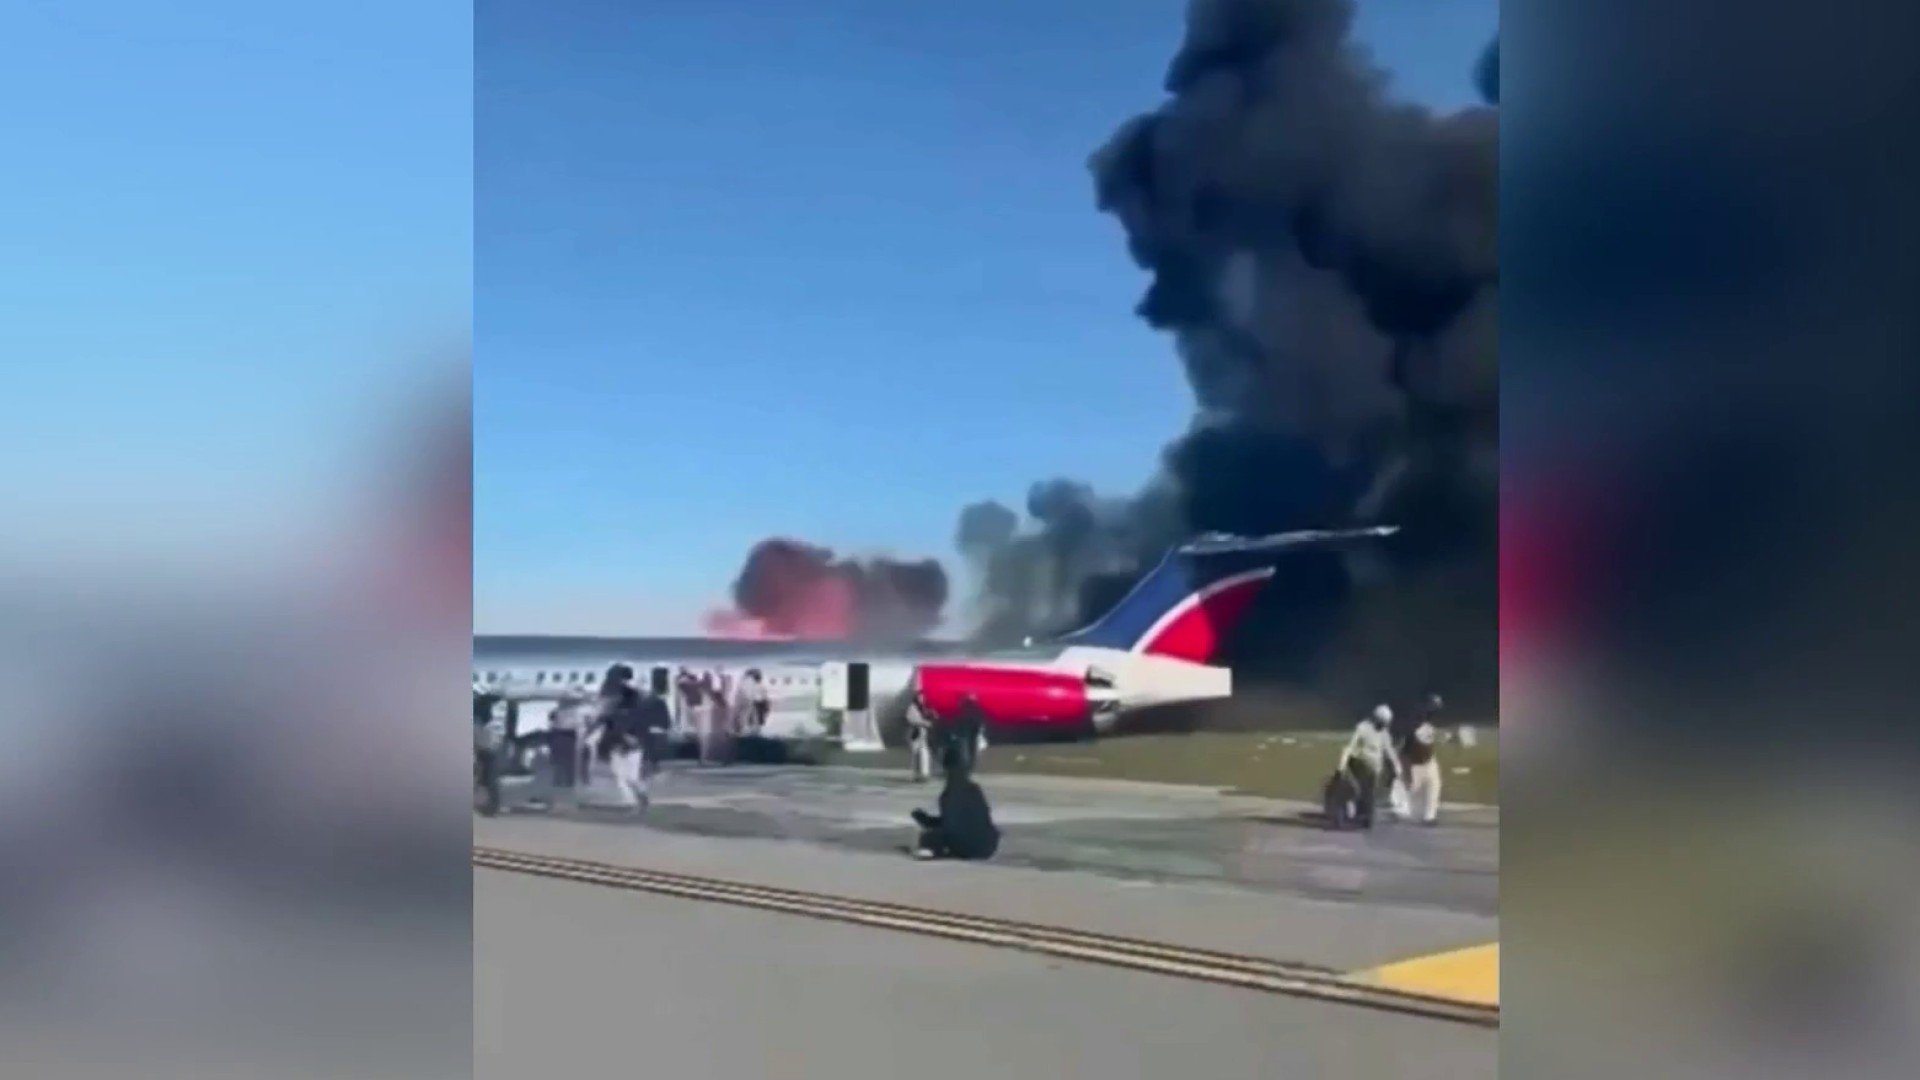 Plane Full of Passengers Catches on Fire at photo image